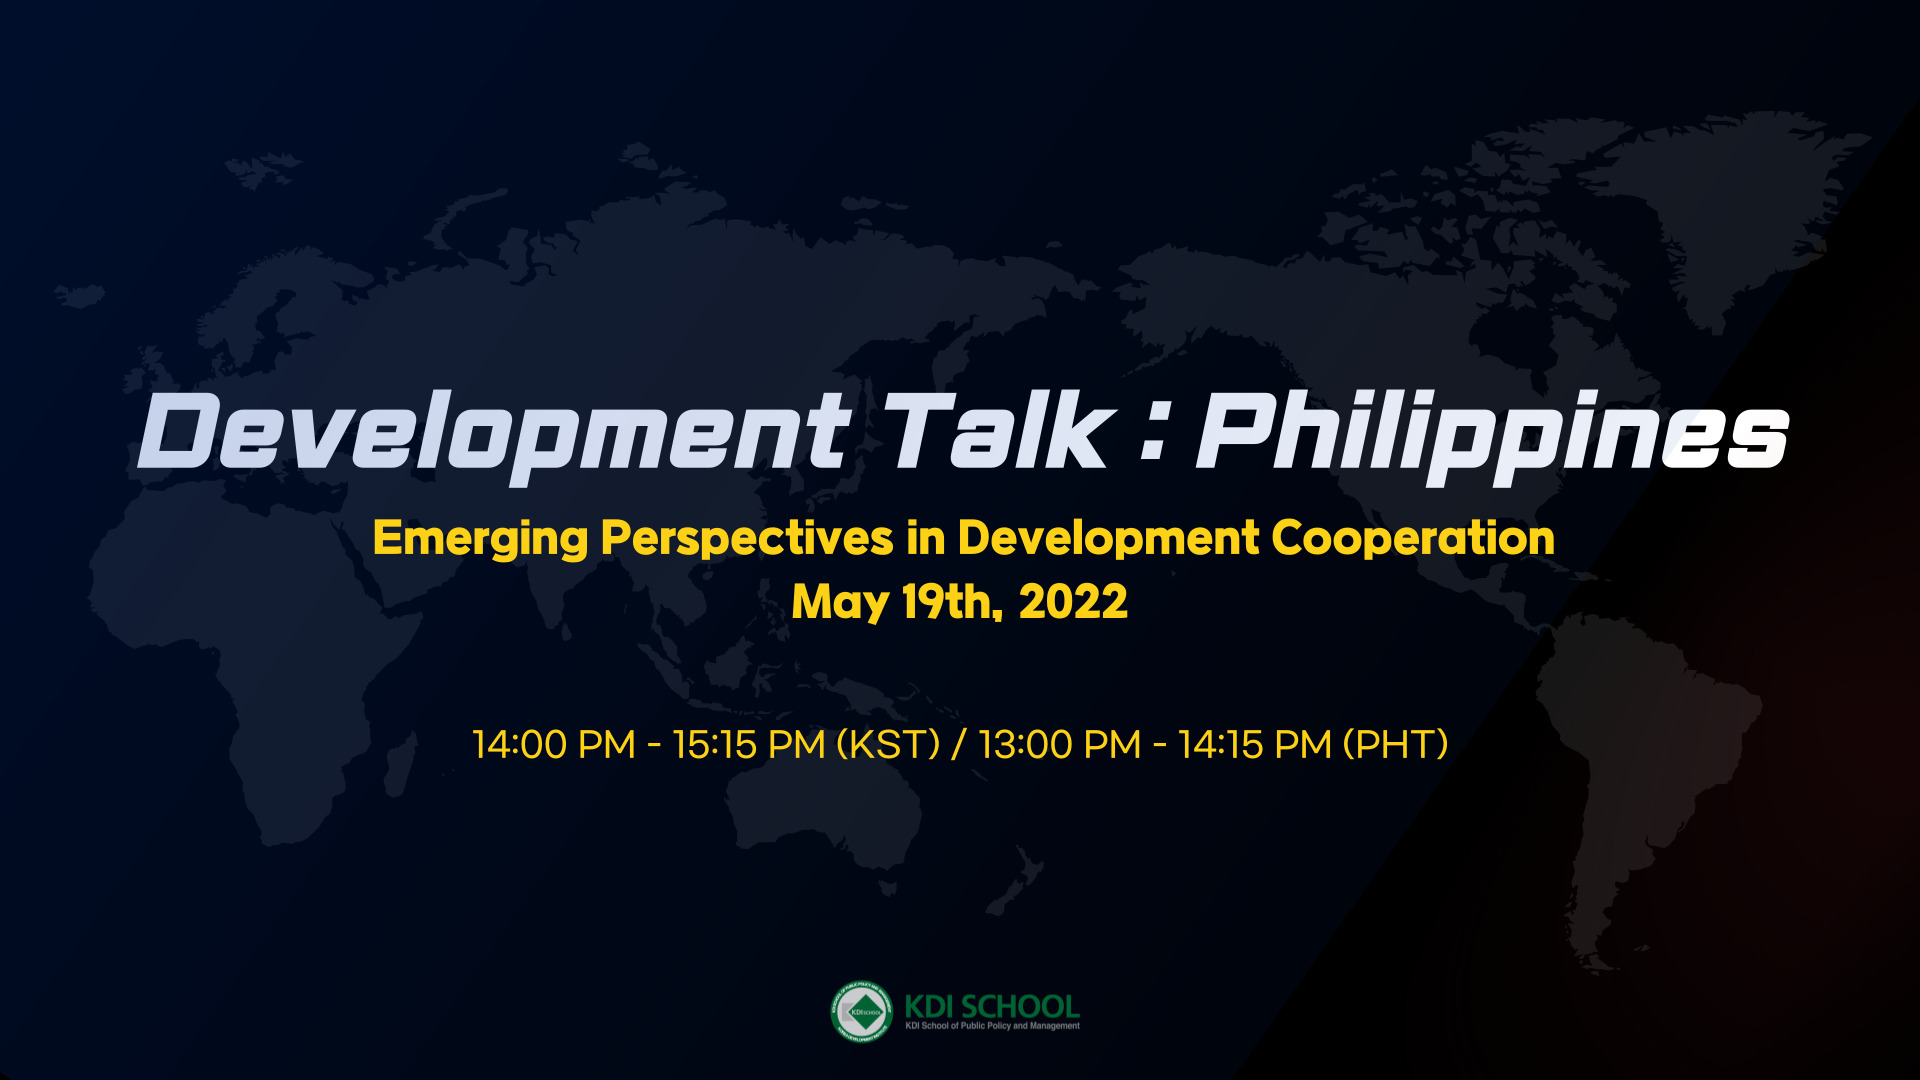 [RSVP] Invitation to the 2022 Development Talks Series (2): Philippines (May 19, Thursday @ 2:00-3:15 pm) 이미지